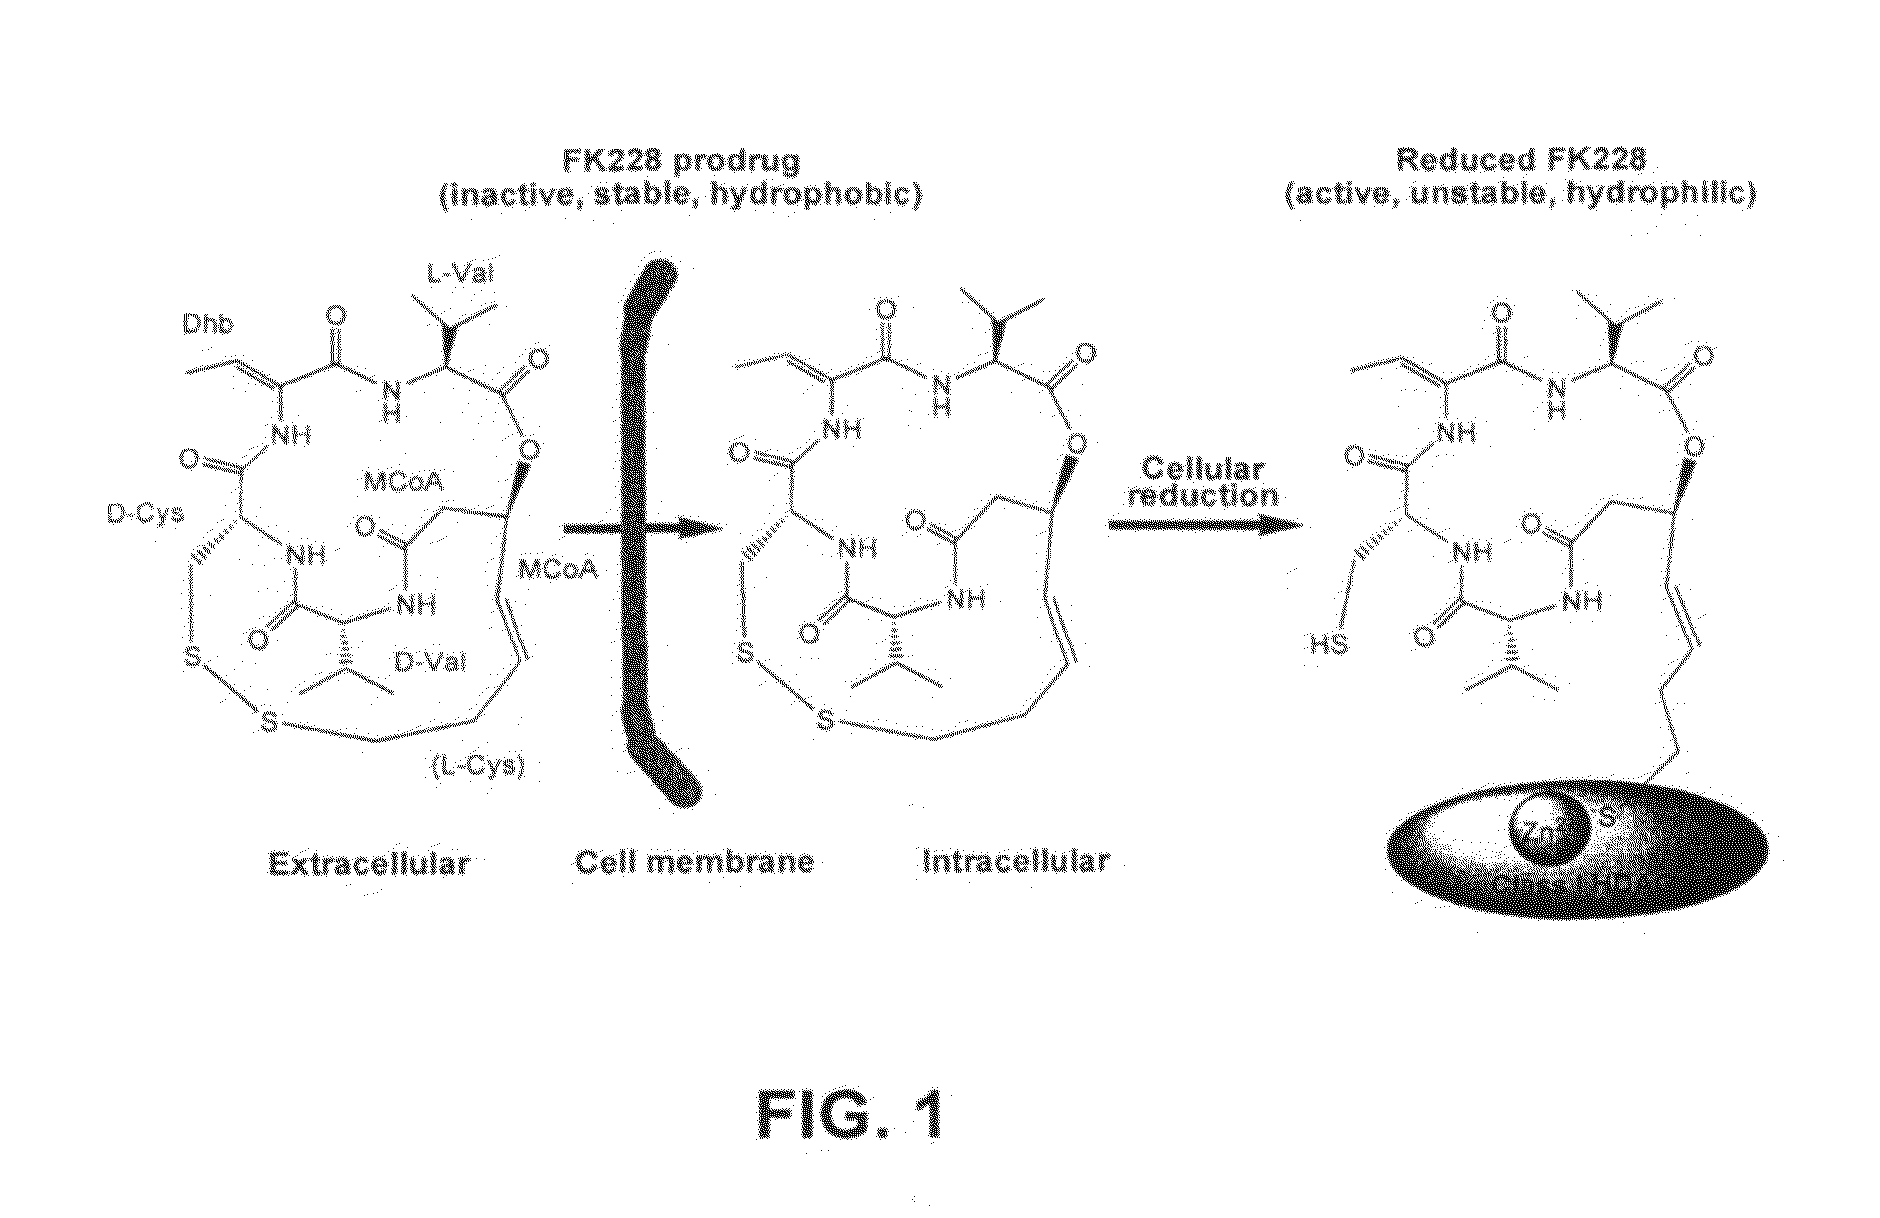 Sequences for FK228 biosynthesis and methods of synthesizing FK228 and FK228 analogs